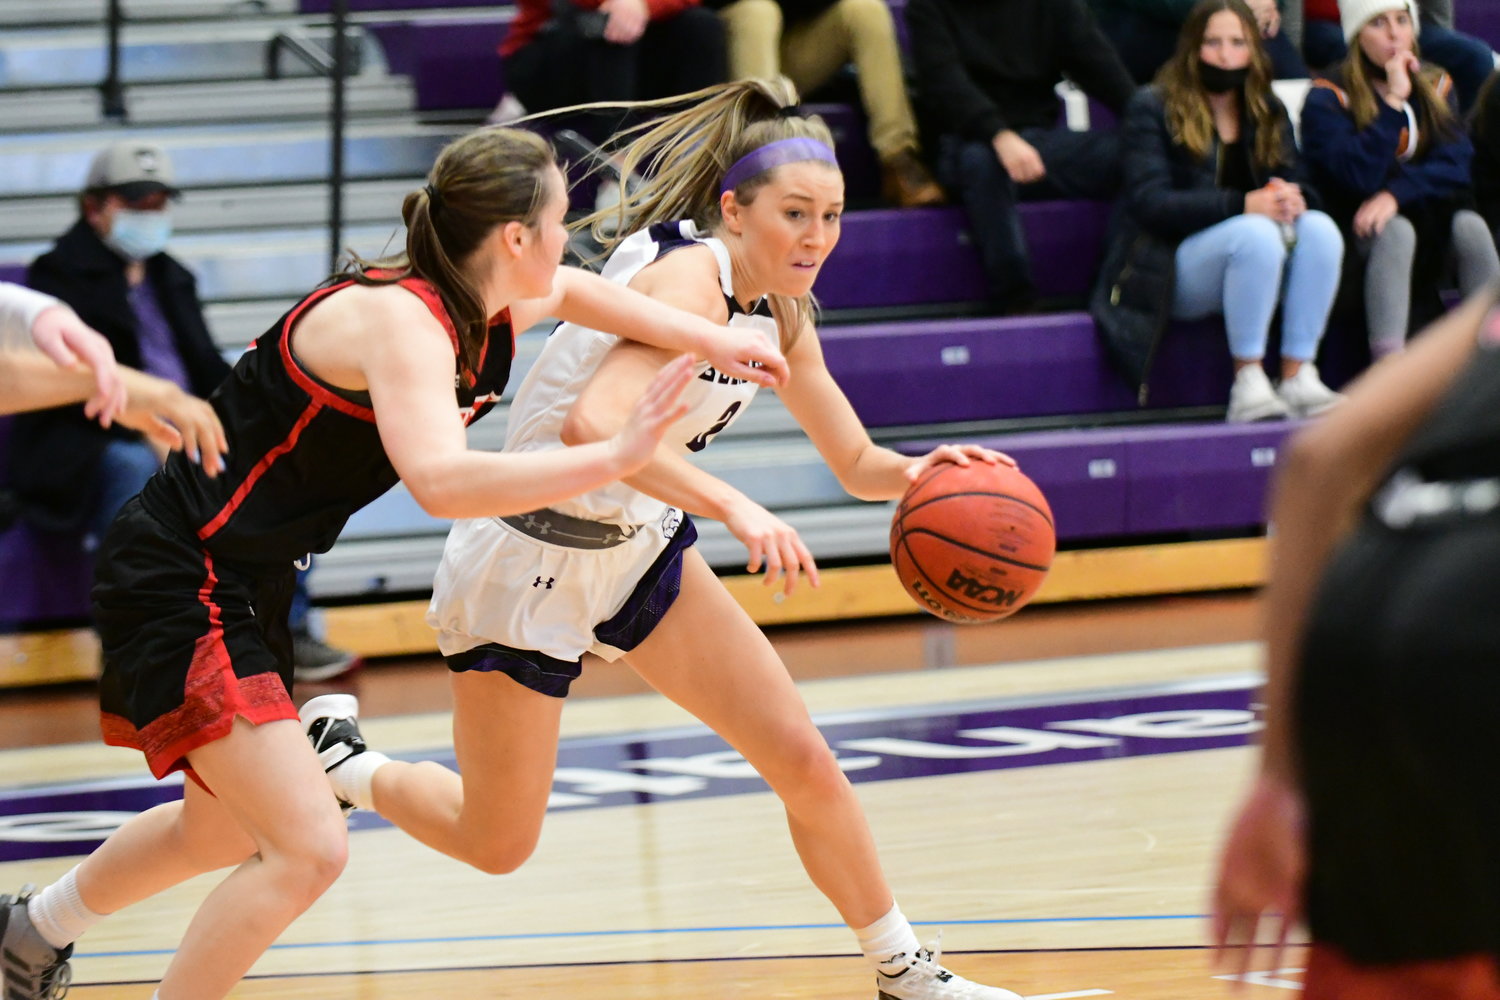 Action from a women's basketball game between Truman and Drury on Jan. 17, 2022.